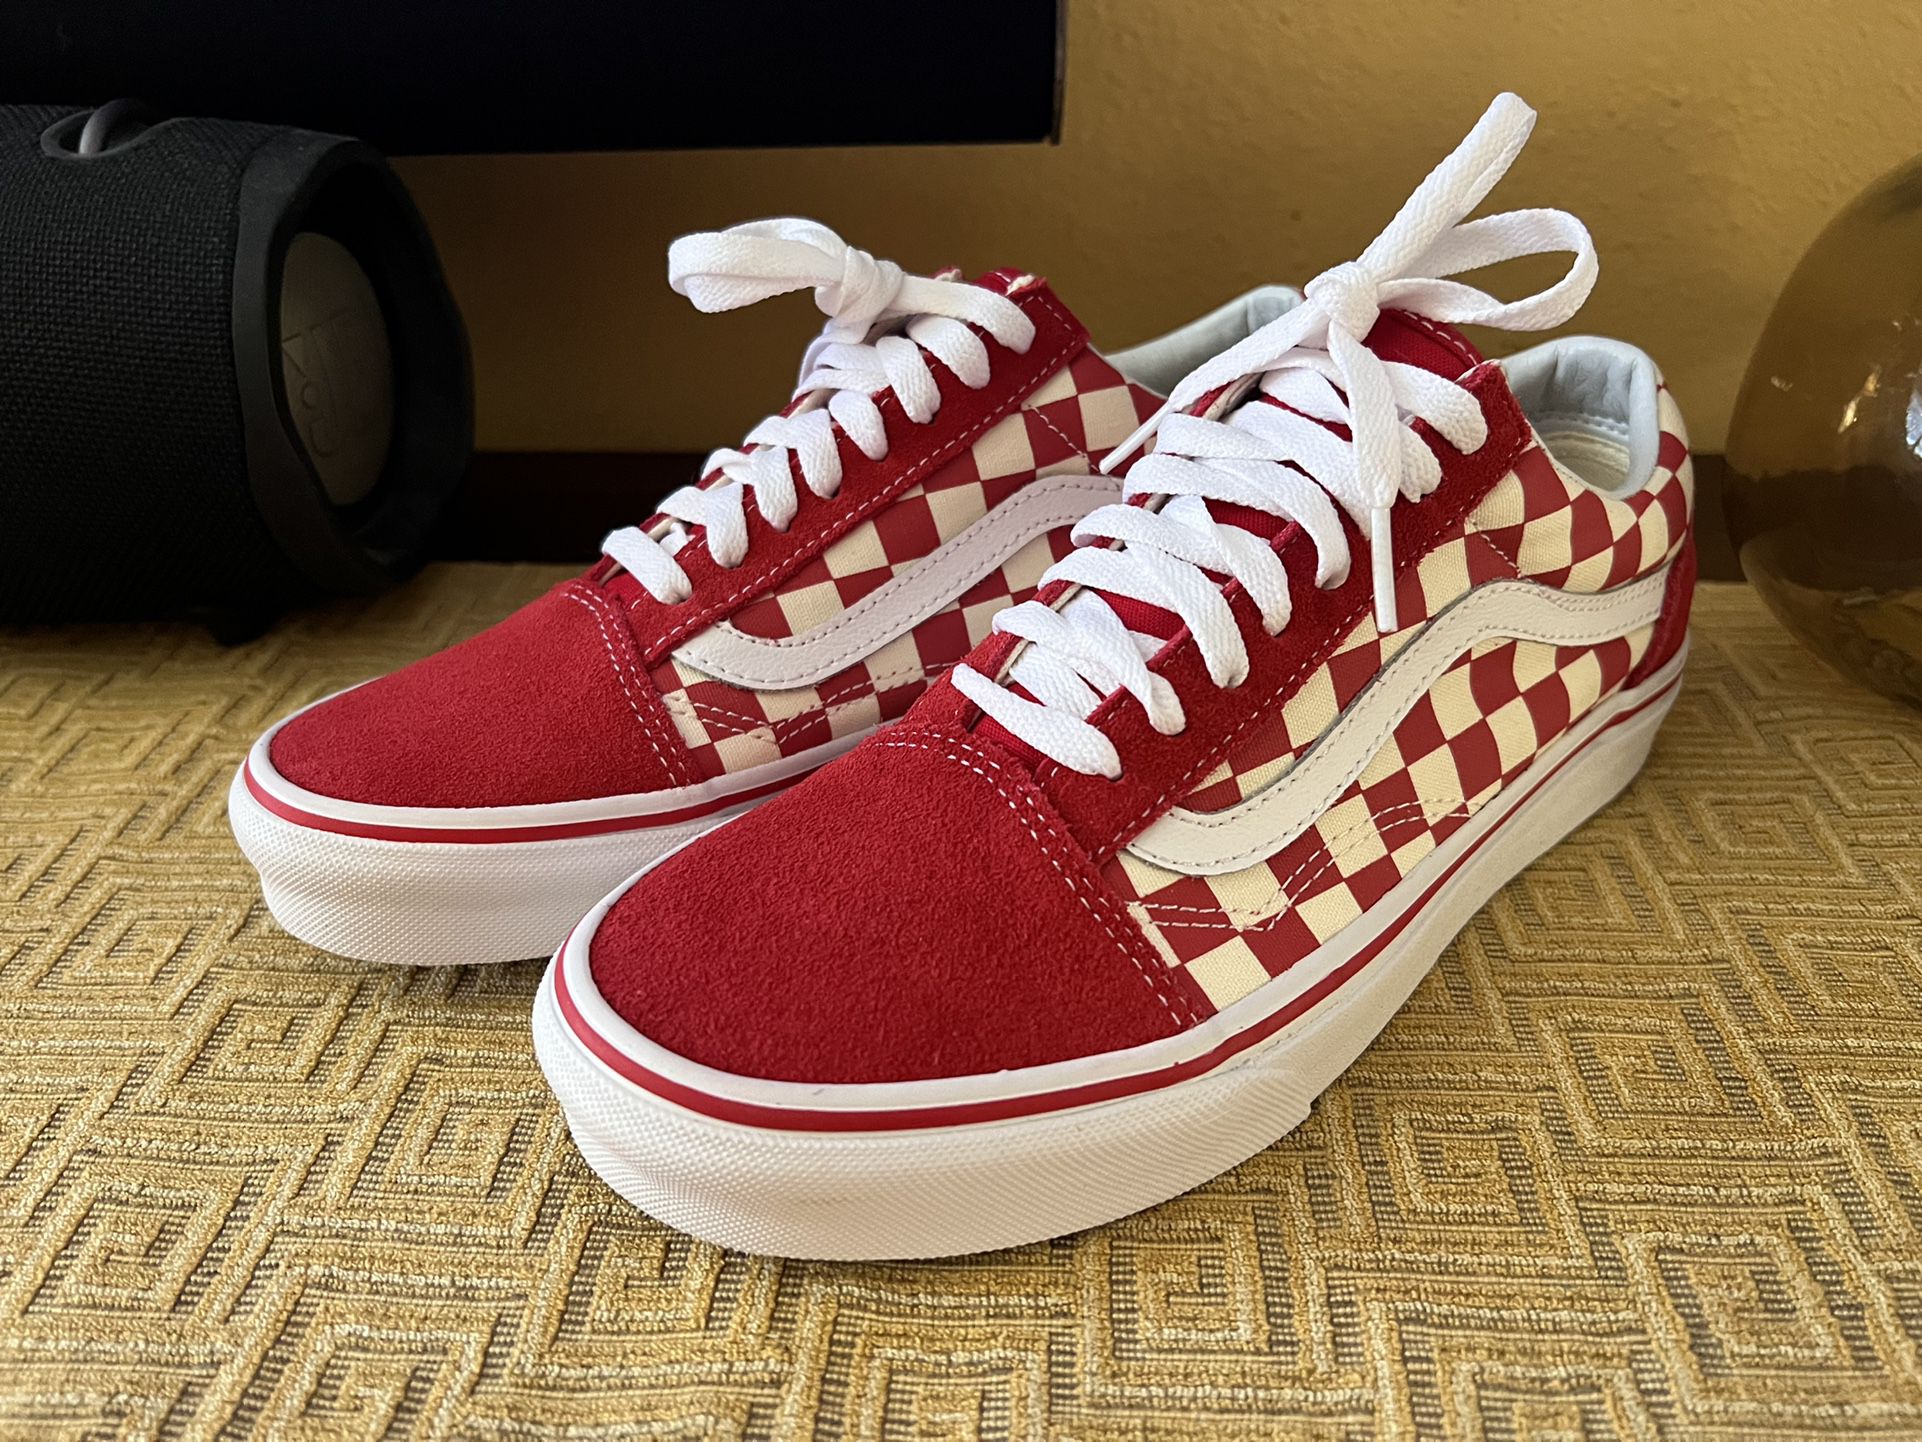 Brand New Vans Red Checkerboard Womans Size 8 And 8.5, Mismatched Pair, Not Supreme, FOG 